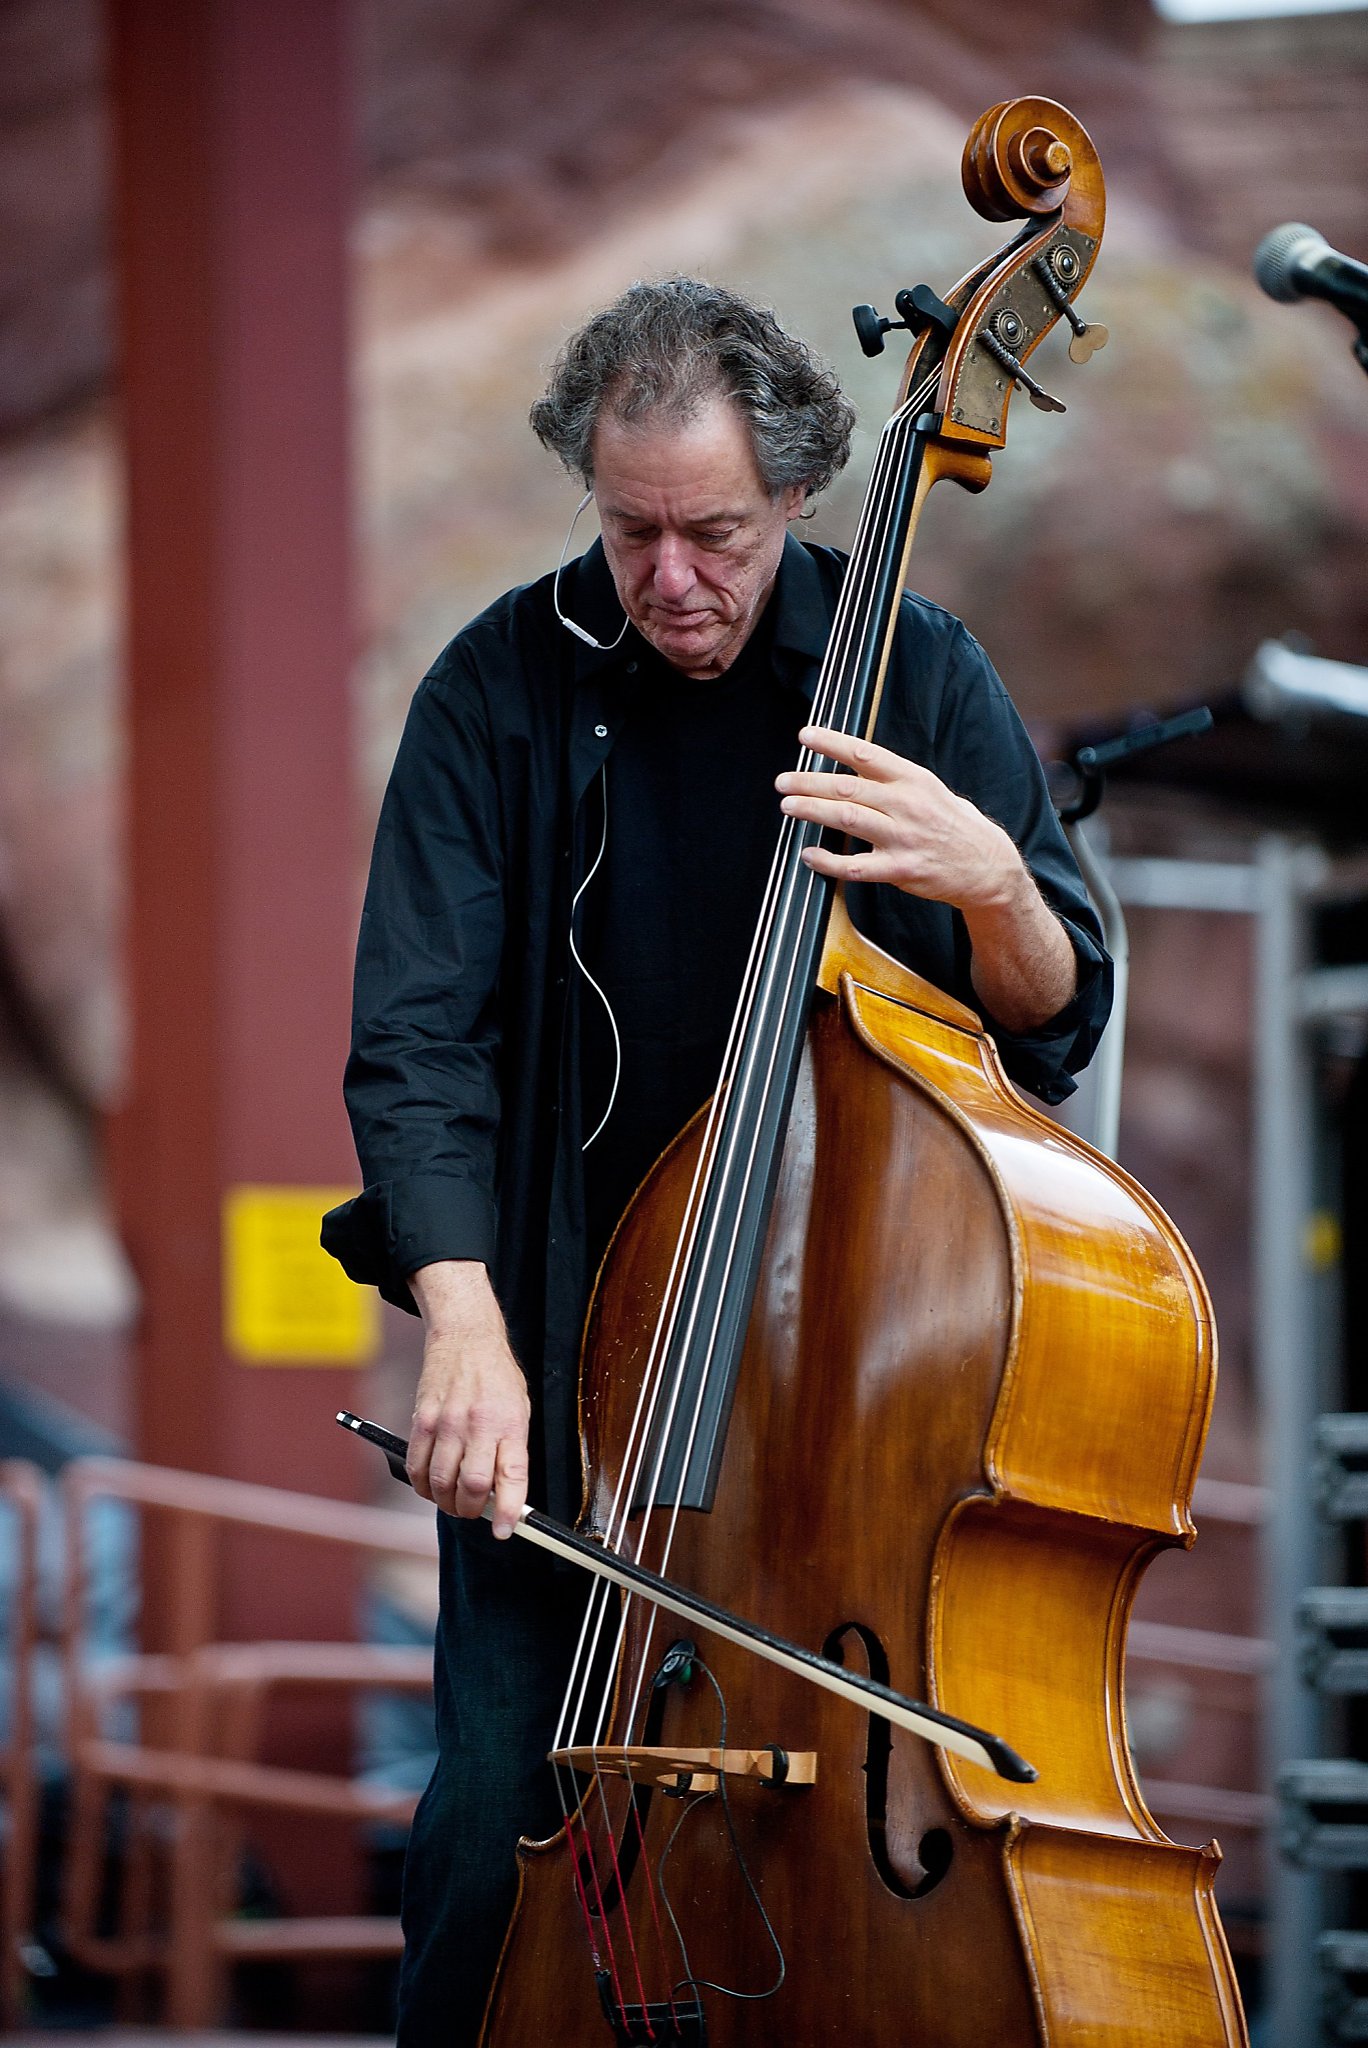 Rob Wasserman, bassist who played with Bob Weir, dies at 64 - SFGate1368 x 2048